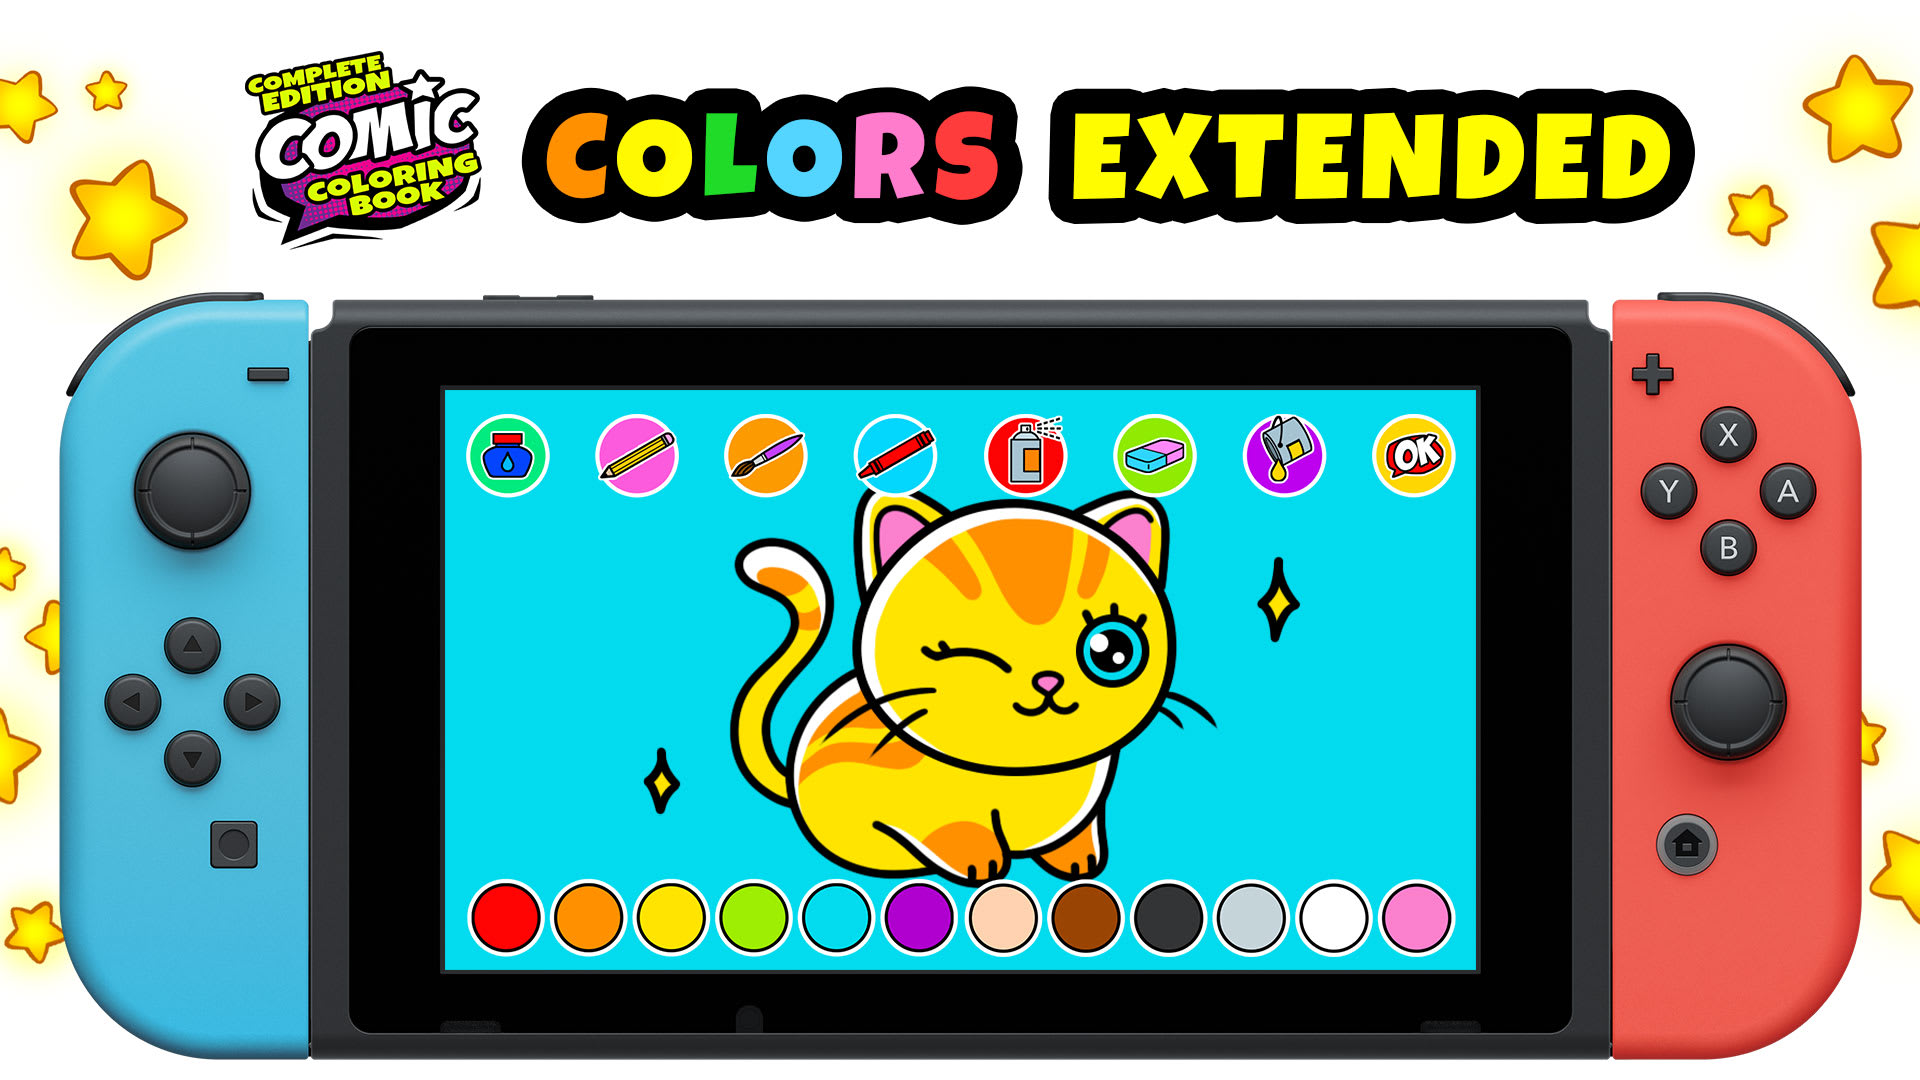 Comic Coloring Book Complete Edition: COLORS Extended